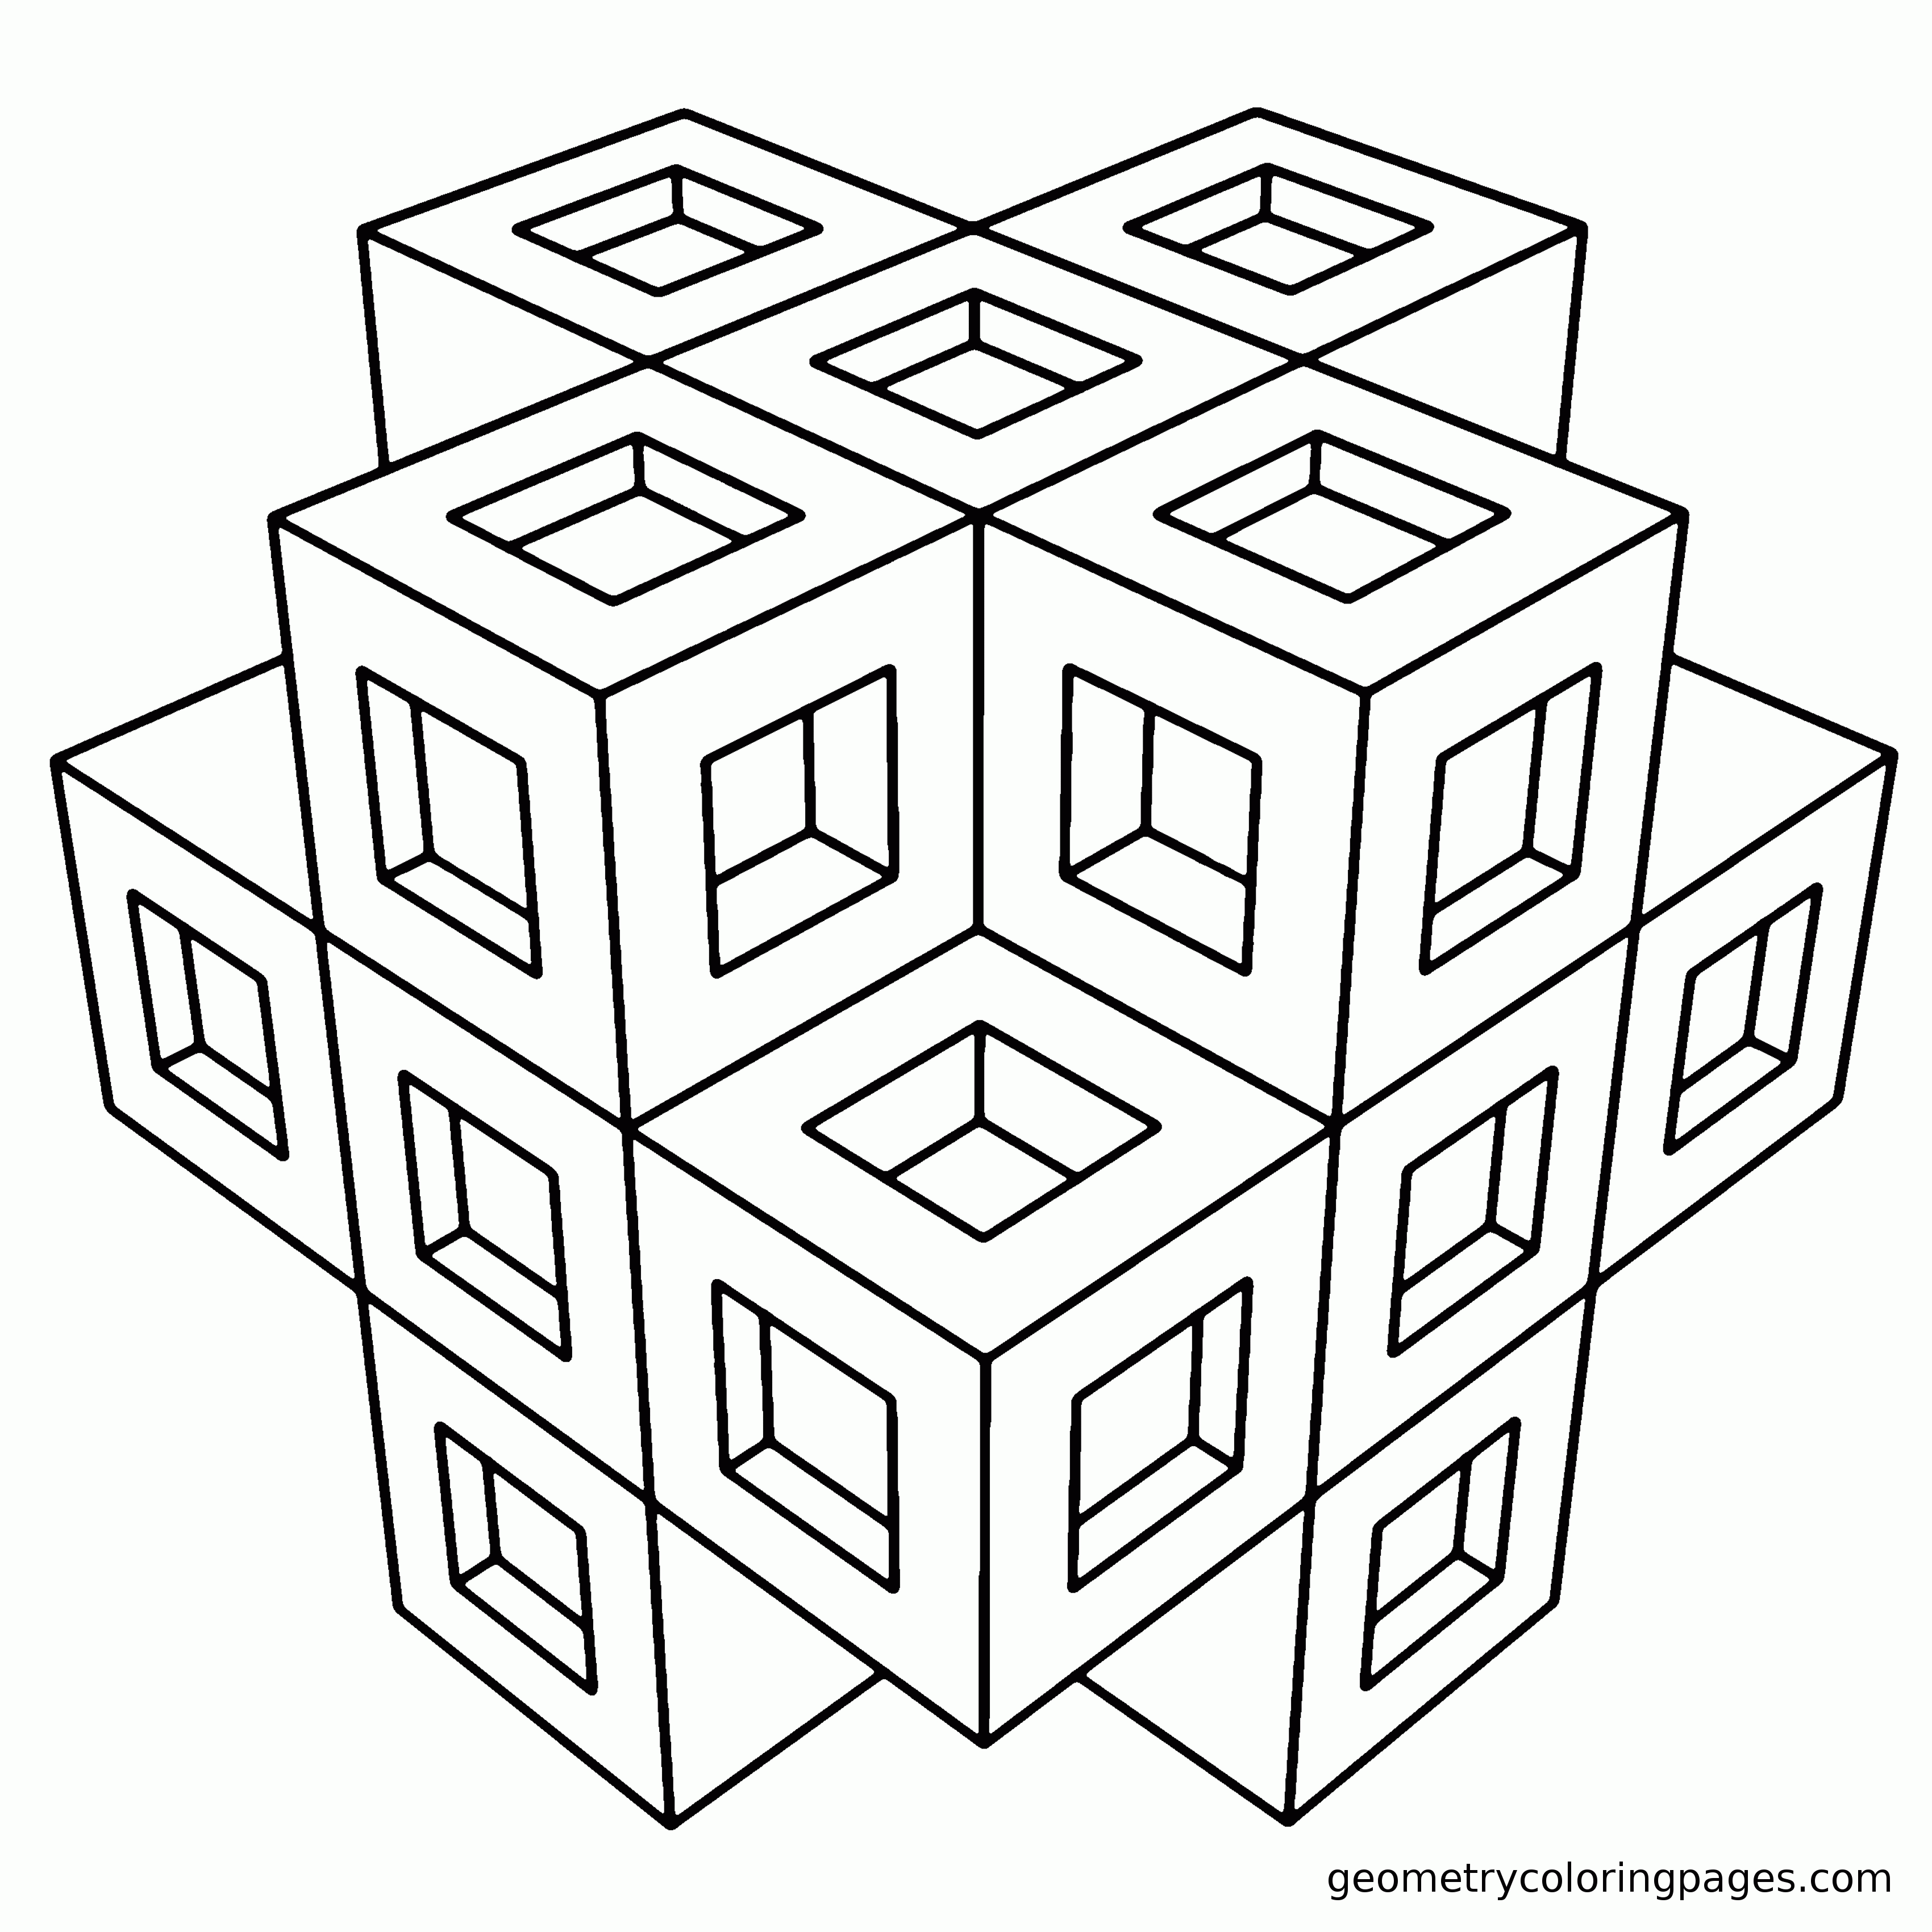 Geometric Coloring Pages Pdf Free Printable Geometric Coloring ...